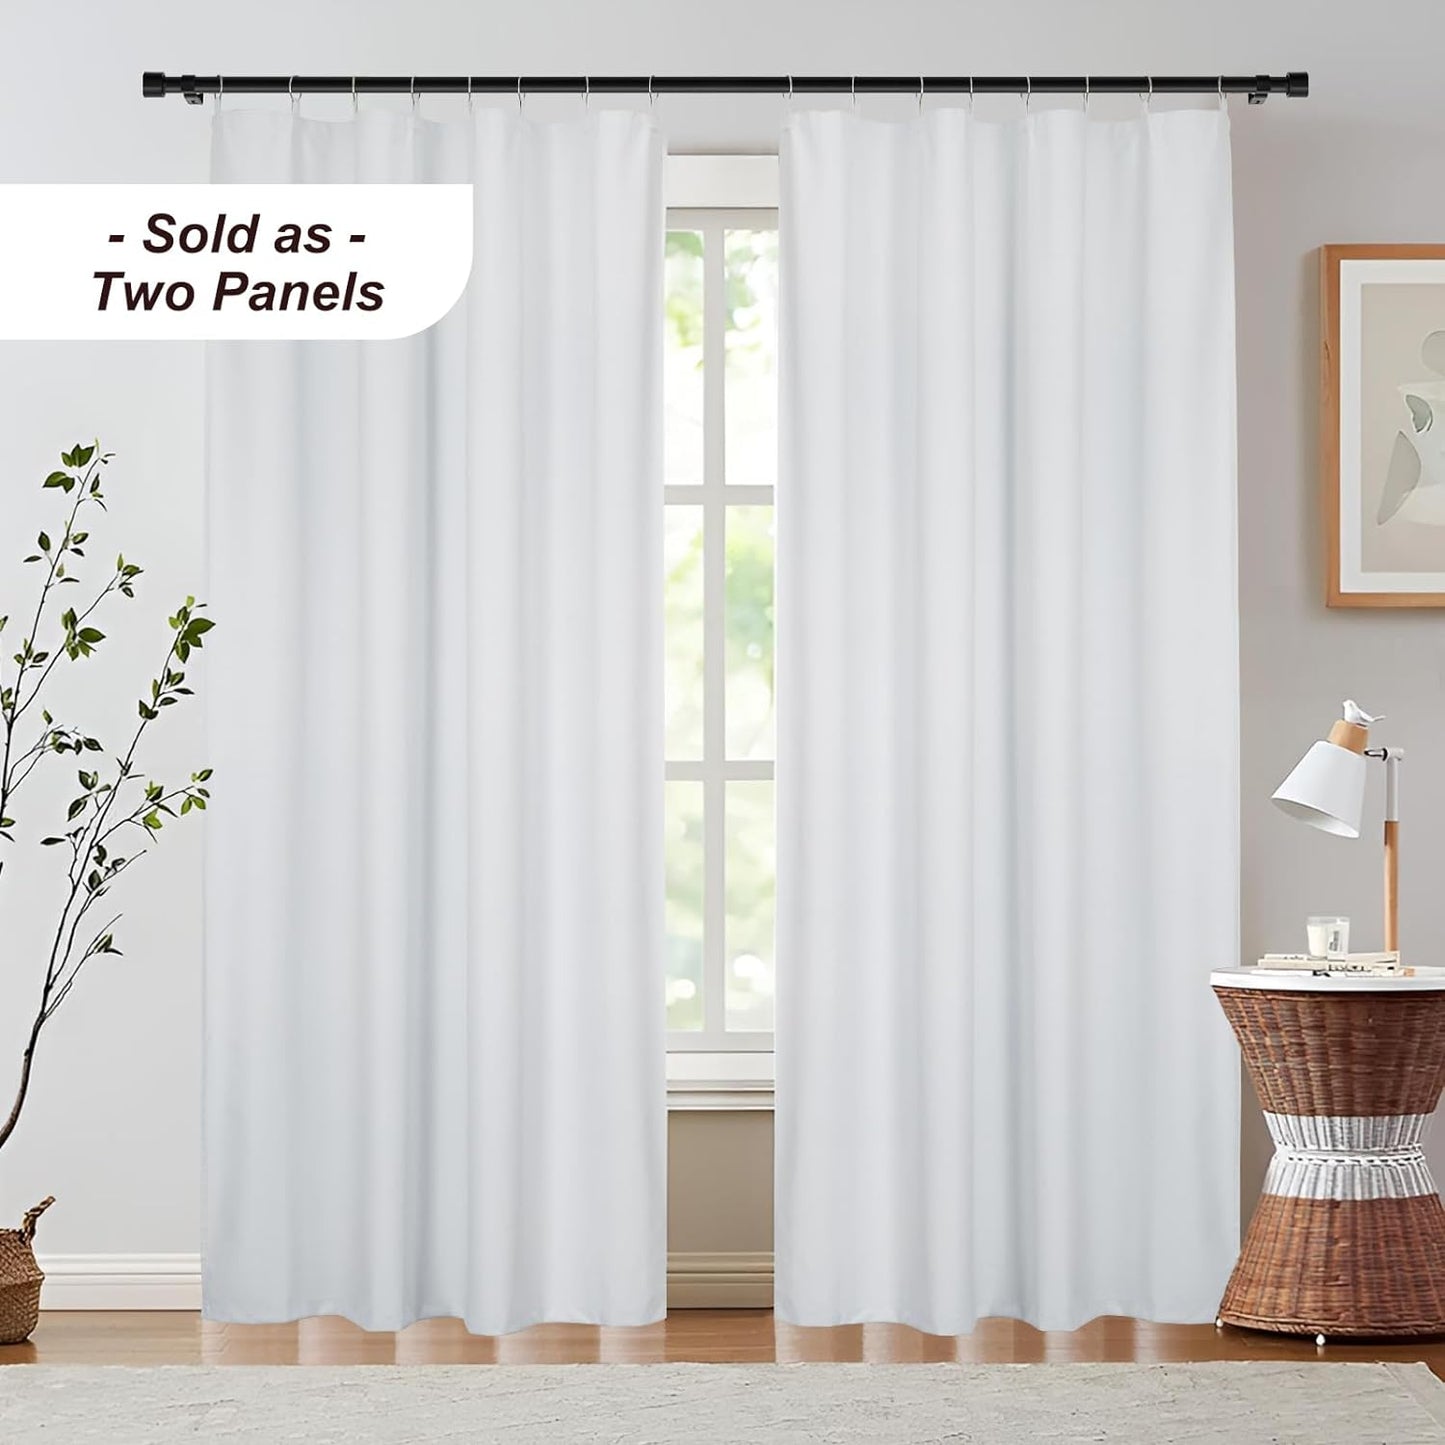 INOVADAY Blackout Curtain Liners 2 Panels Set, Thermal Insulated Light Blocking Liners for Window Curtains 84 Inches Long with Rings (W50 X L80, White)  INOVADAY   